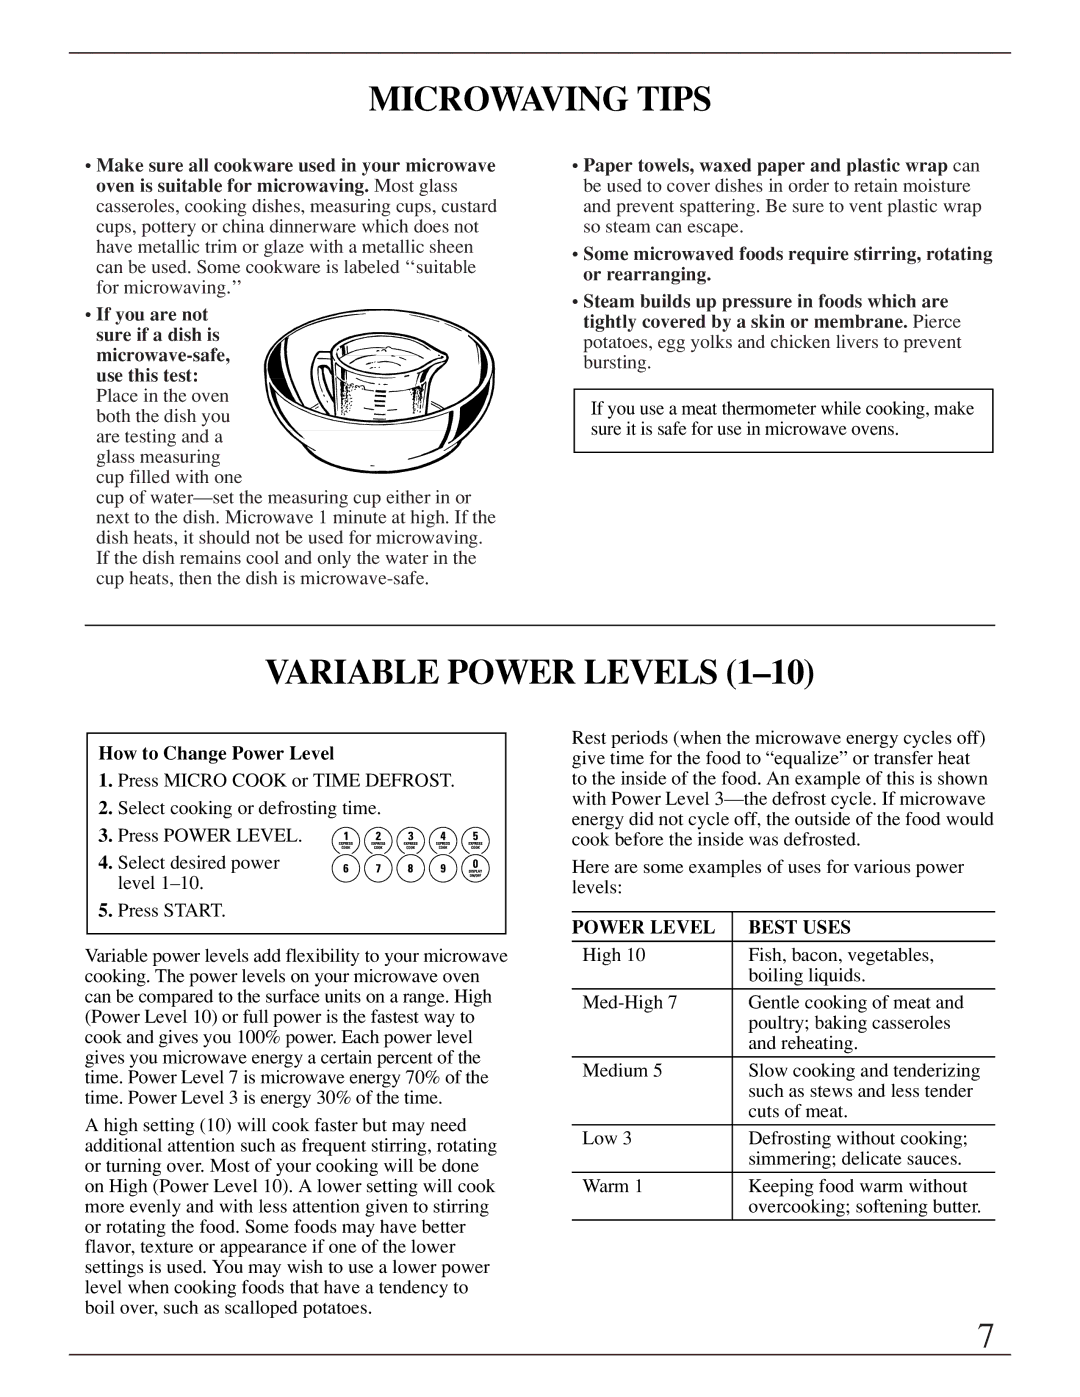 GE ZMC1095 owner manual Microwaving Tips, Variable Power Levels, How to Change Power Level 